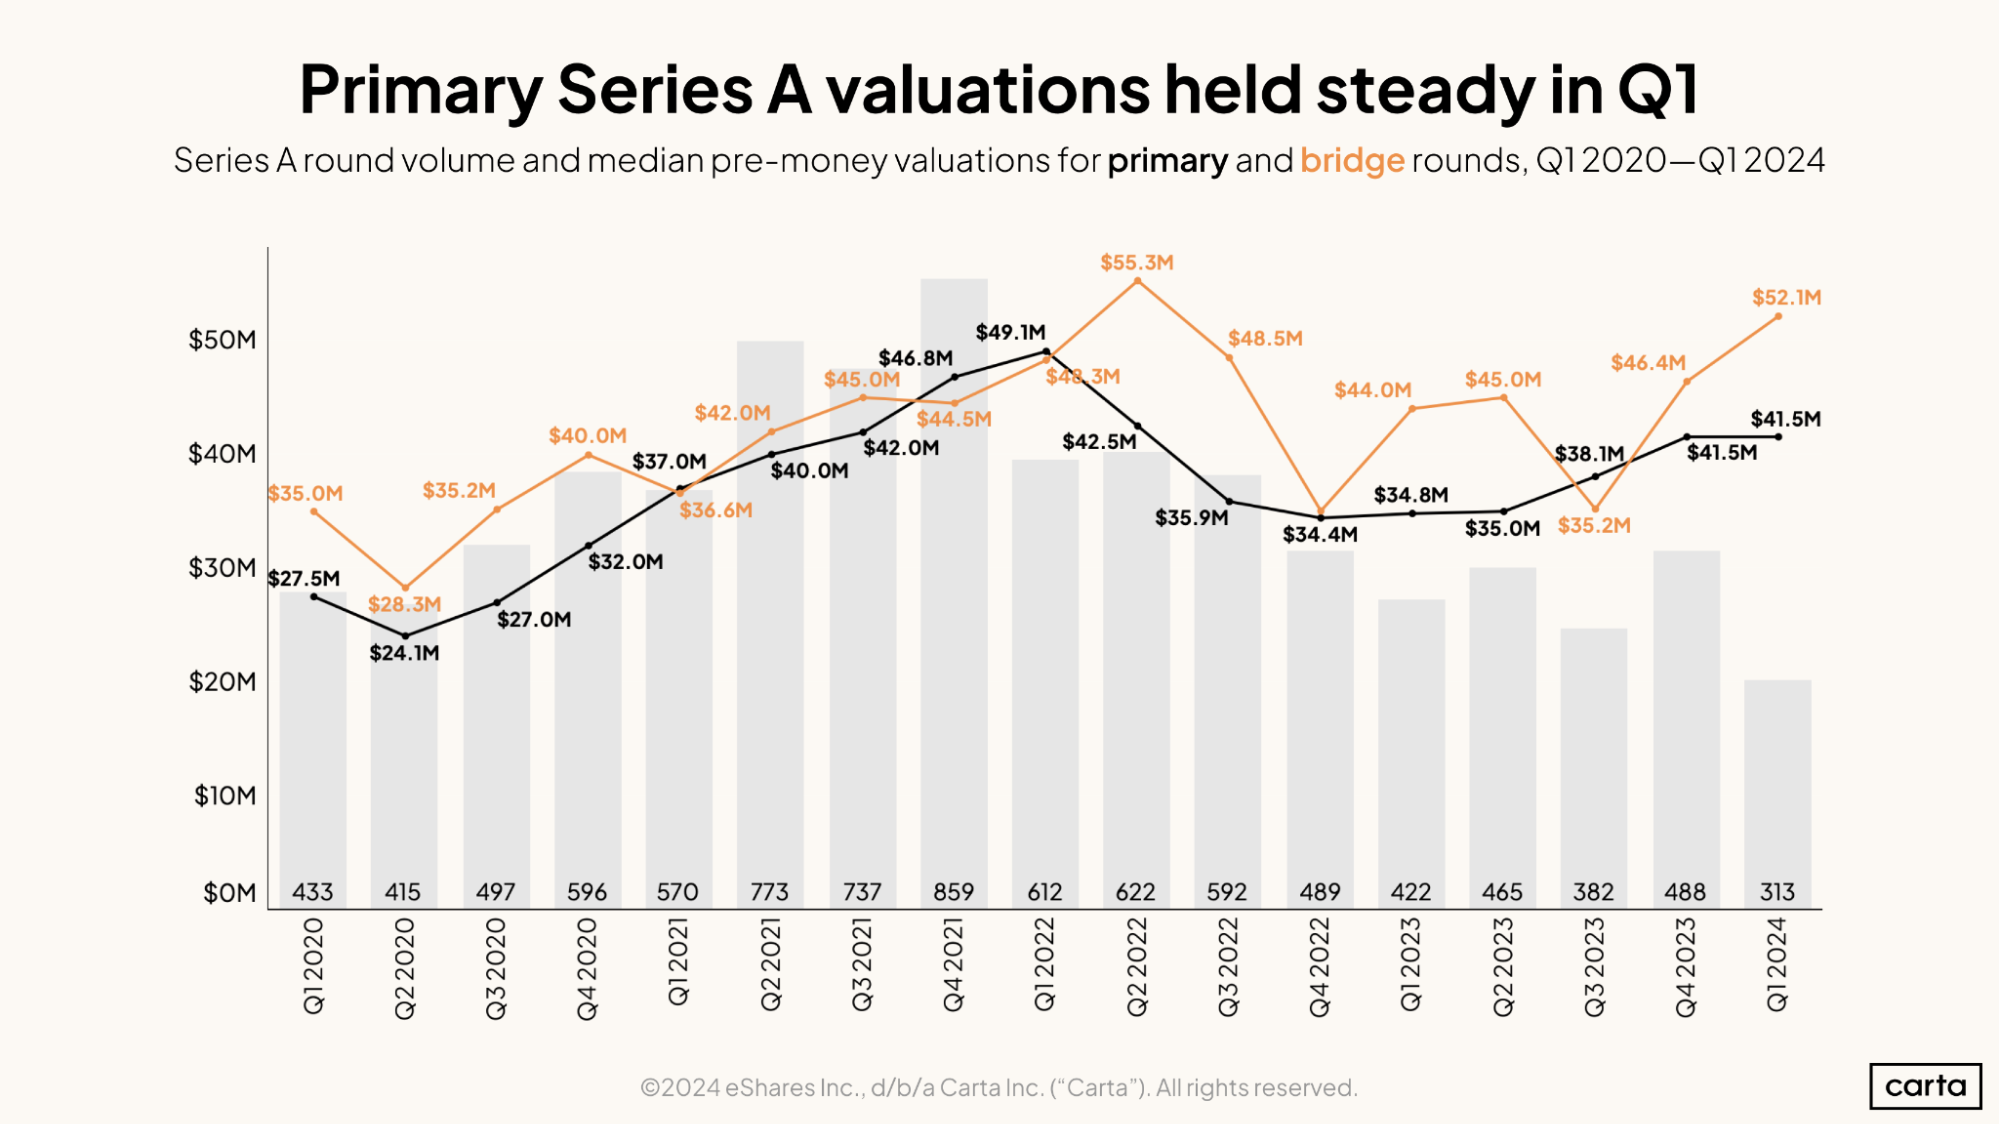 Primary Series A valuations held steady in Q1